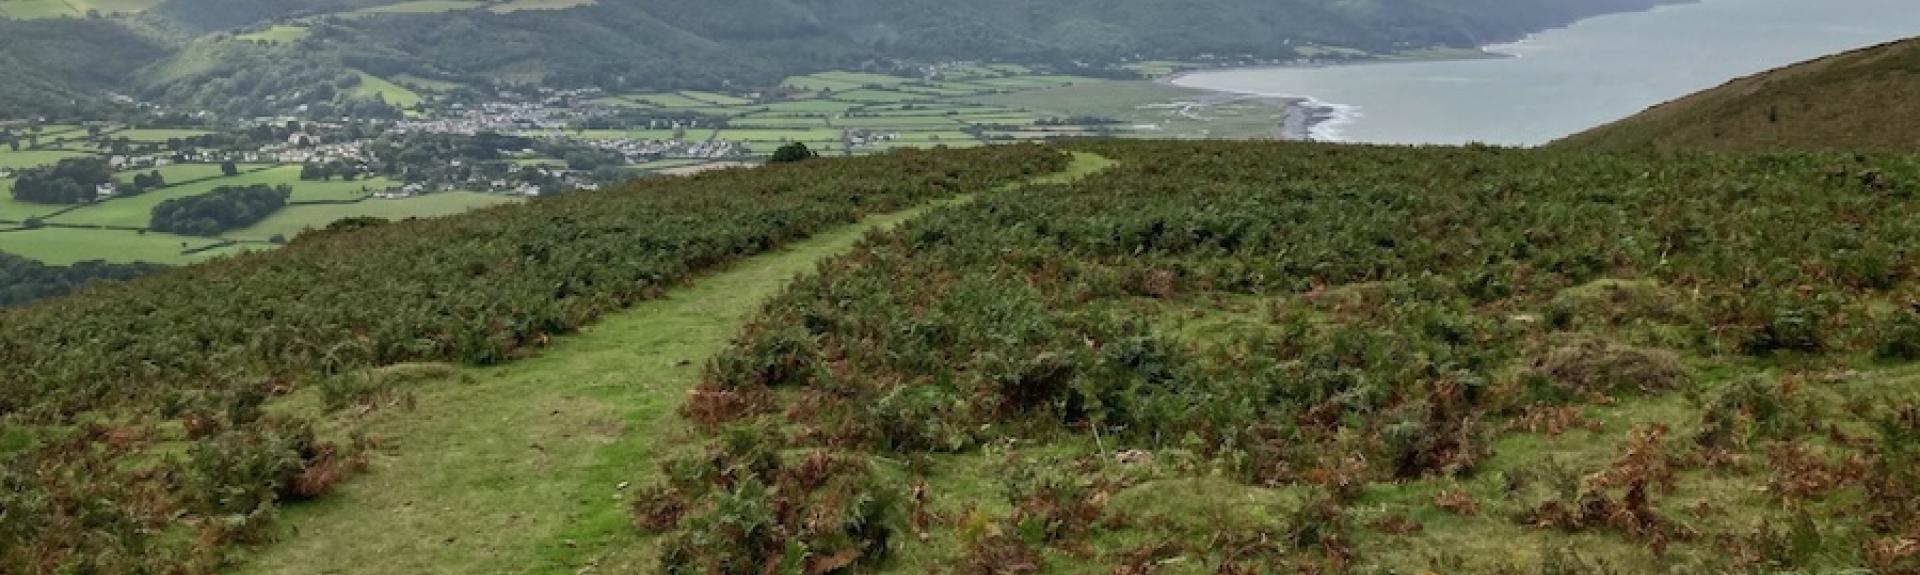 View from a hilltop footpath of Porlock Bay on Exmoor.